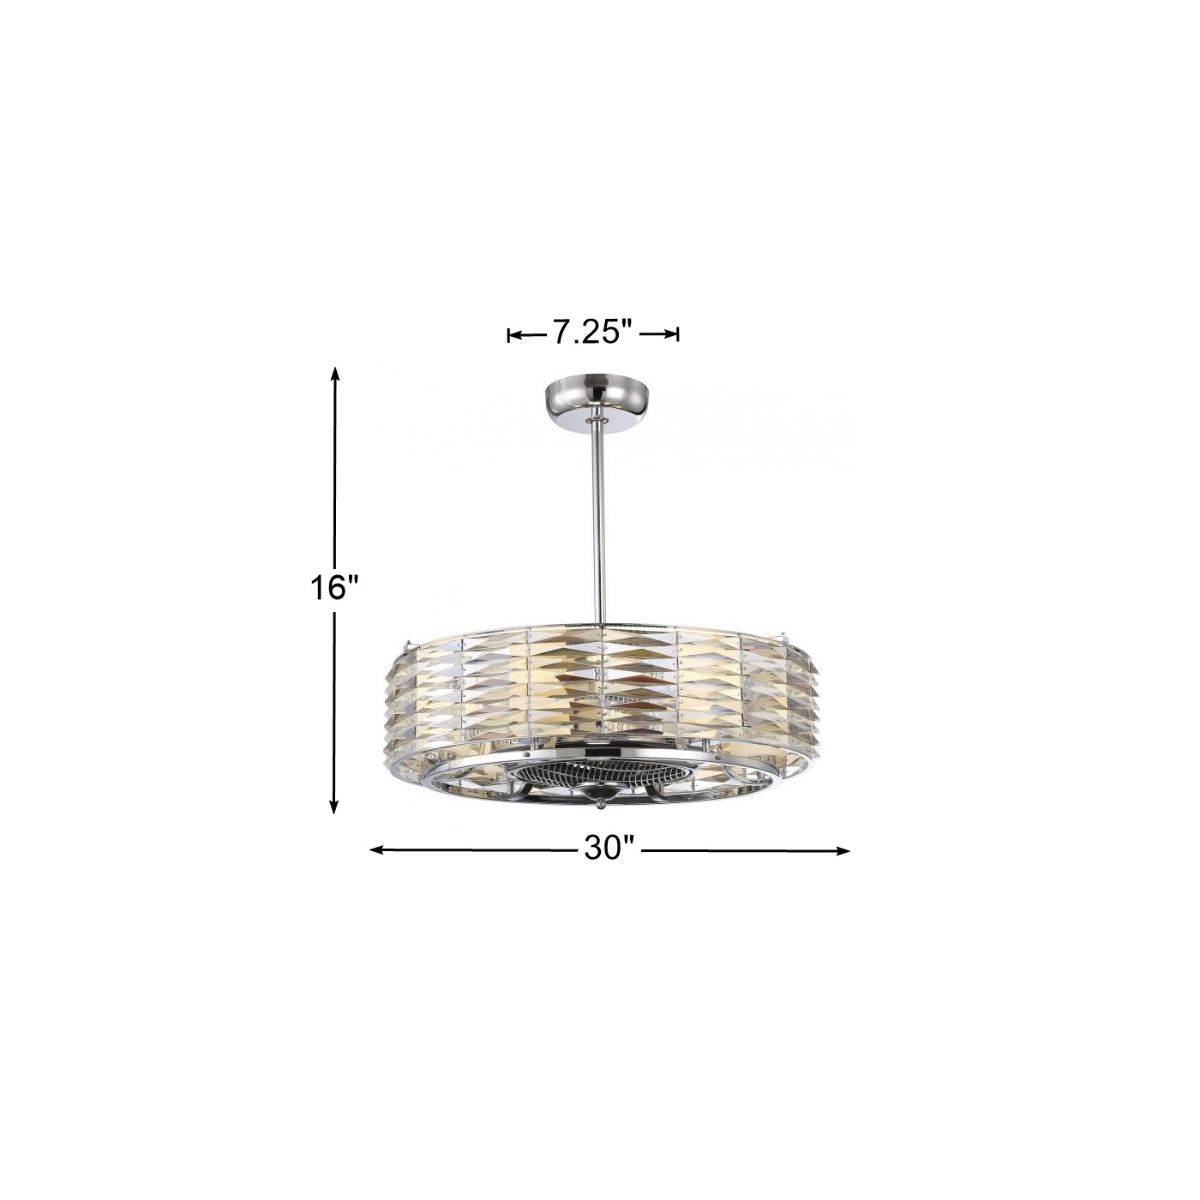 Taurus 30 Inch Chandelier Ceiling Fan With Light And Remote, Polished Chrome Finish - Bees Lighting